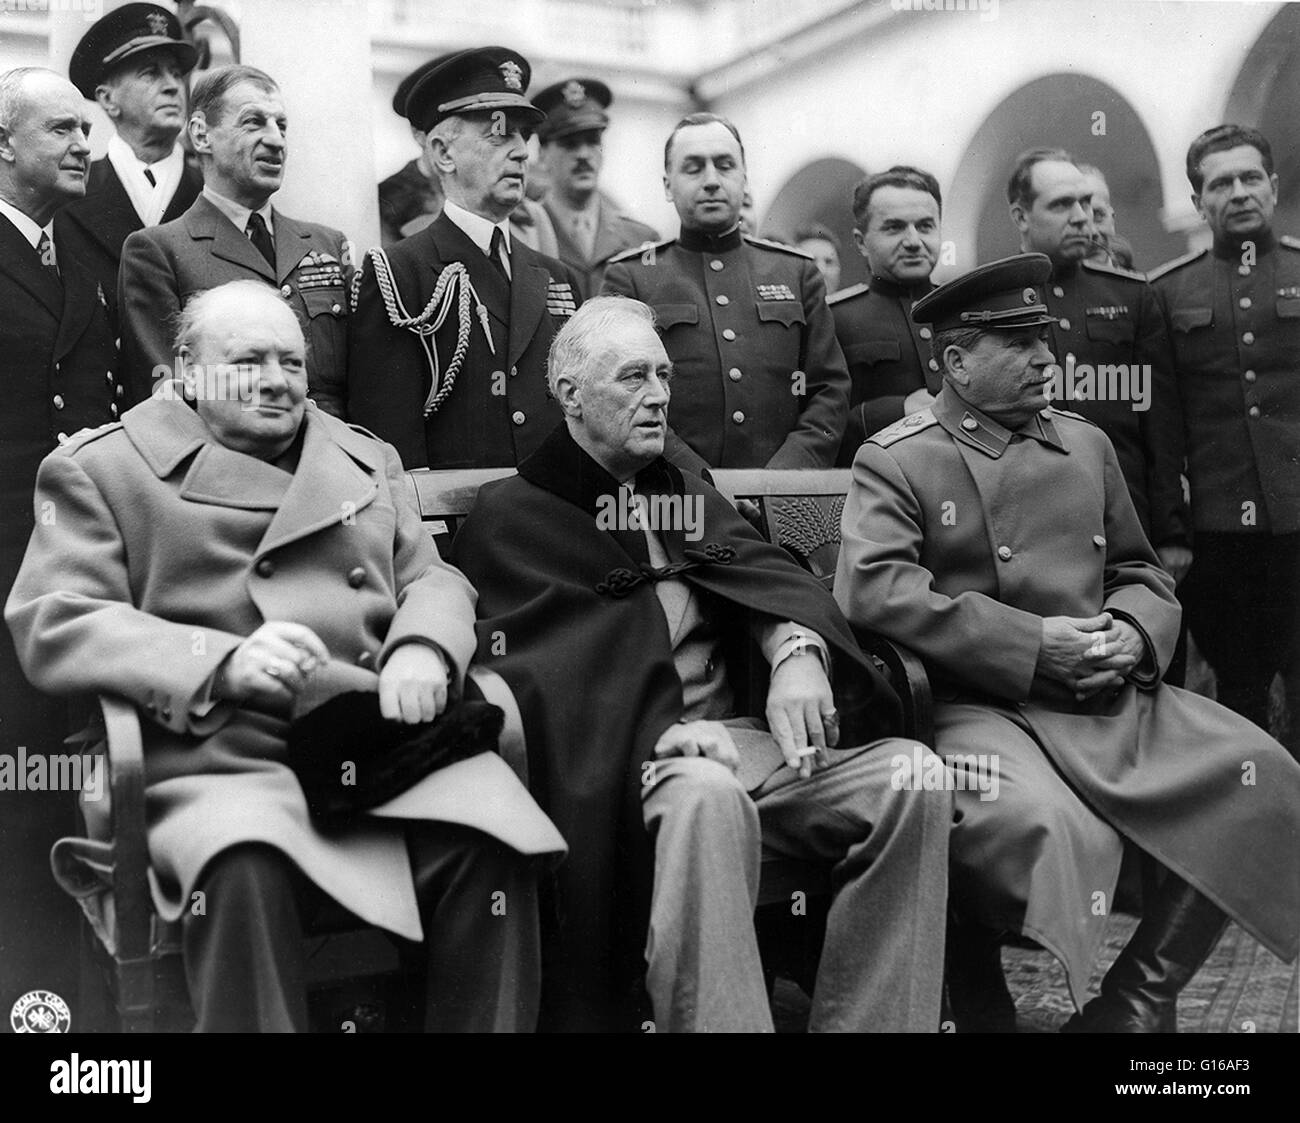 Yalta Conference. Prime Minister Winston Churchill, President Franklin D. Roosevelt, and Marshal Joseph Stalin at the palace in Yalta, where the Big Three met in February 1945. The Yalta Conference, sometimes called the Crimea Conference and codenamed the Stock Photo